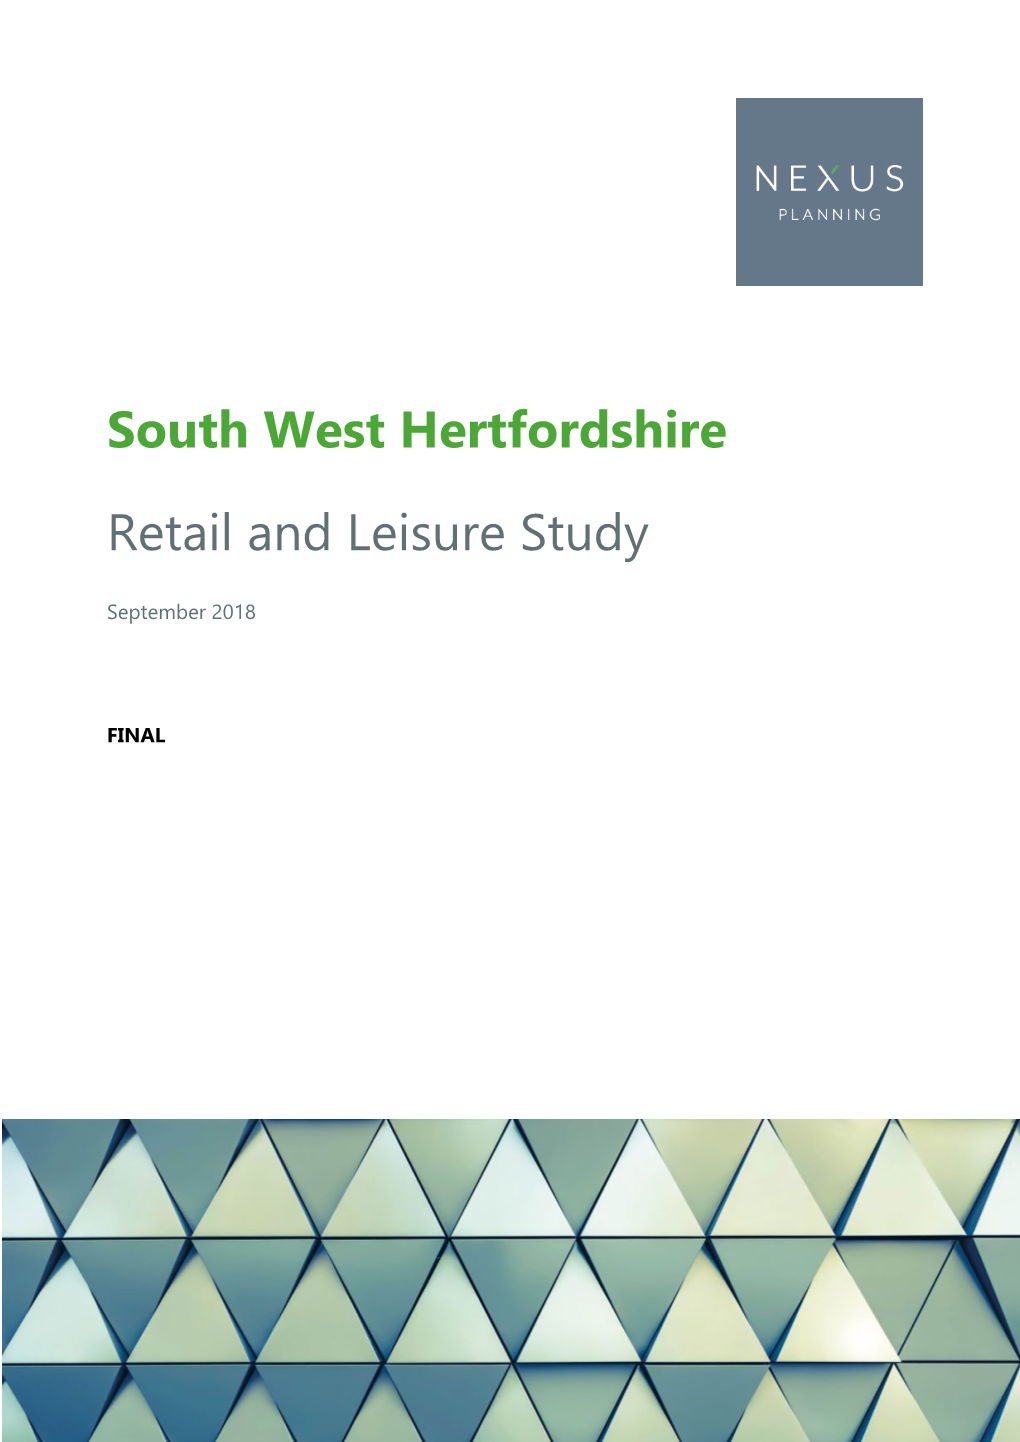 South West Hertfordshire Retail and Leisure Study